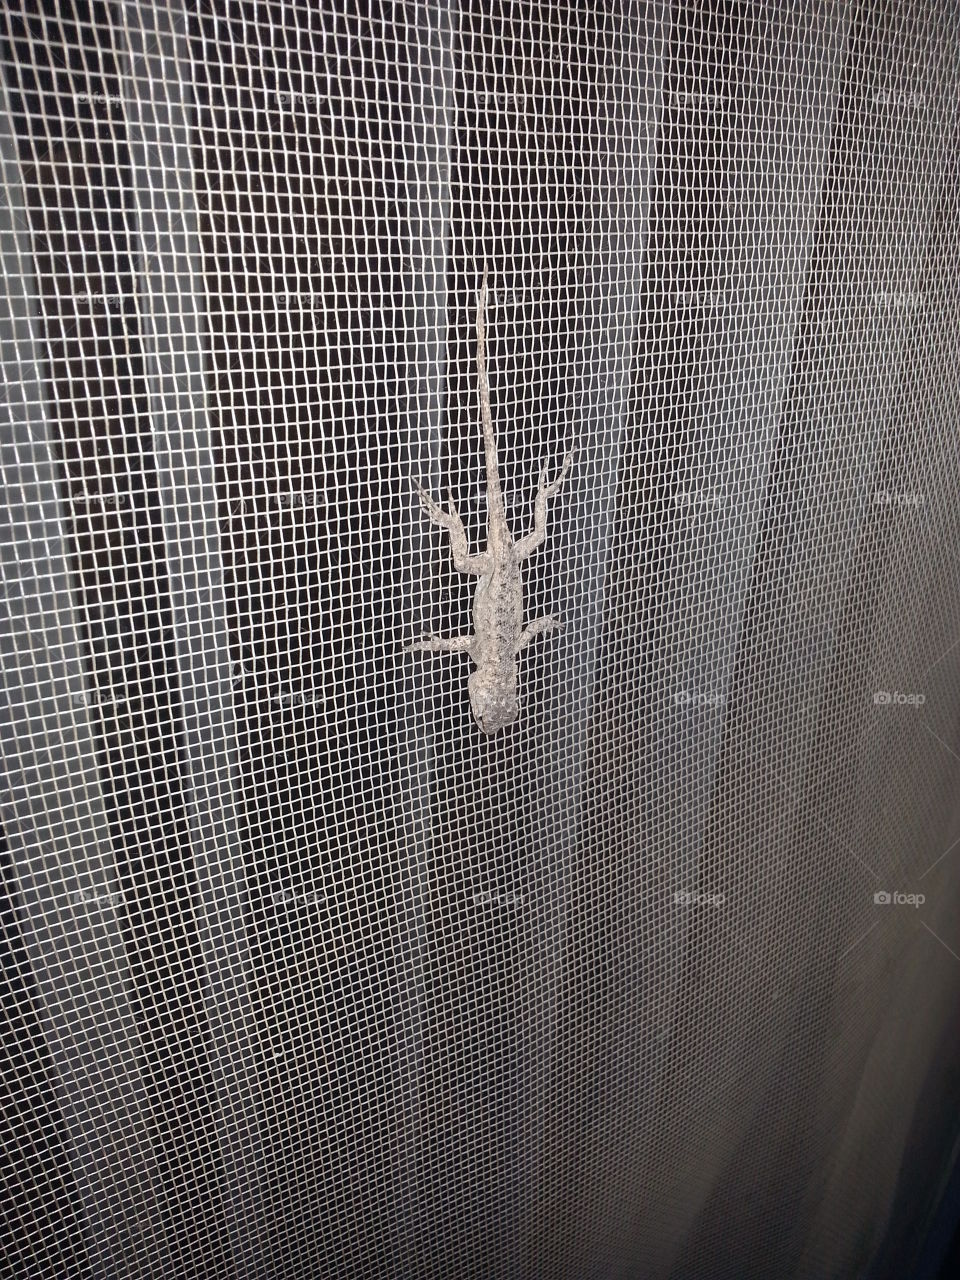 There is a lizard on my screen